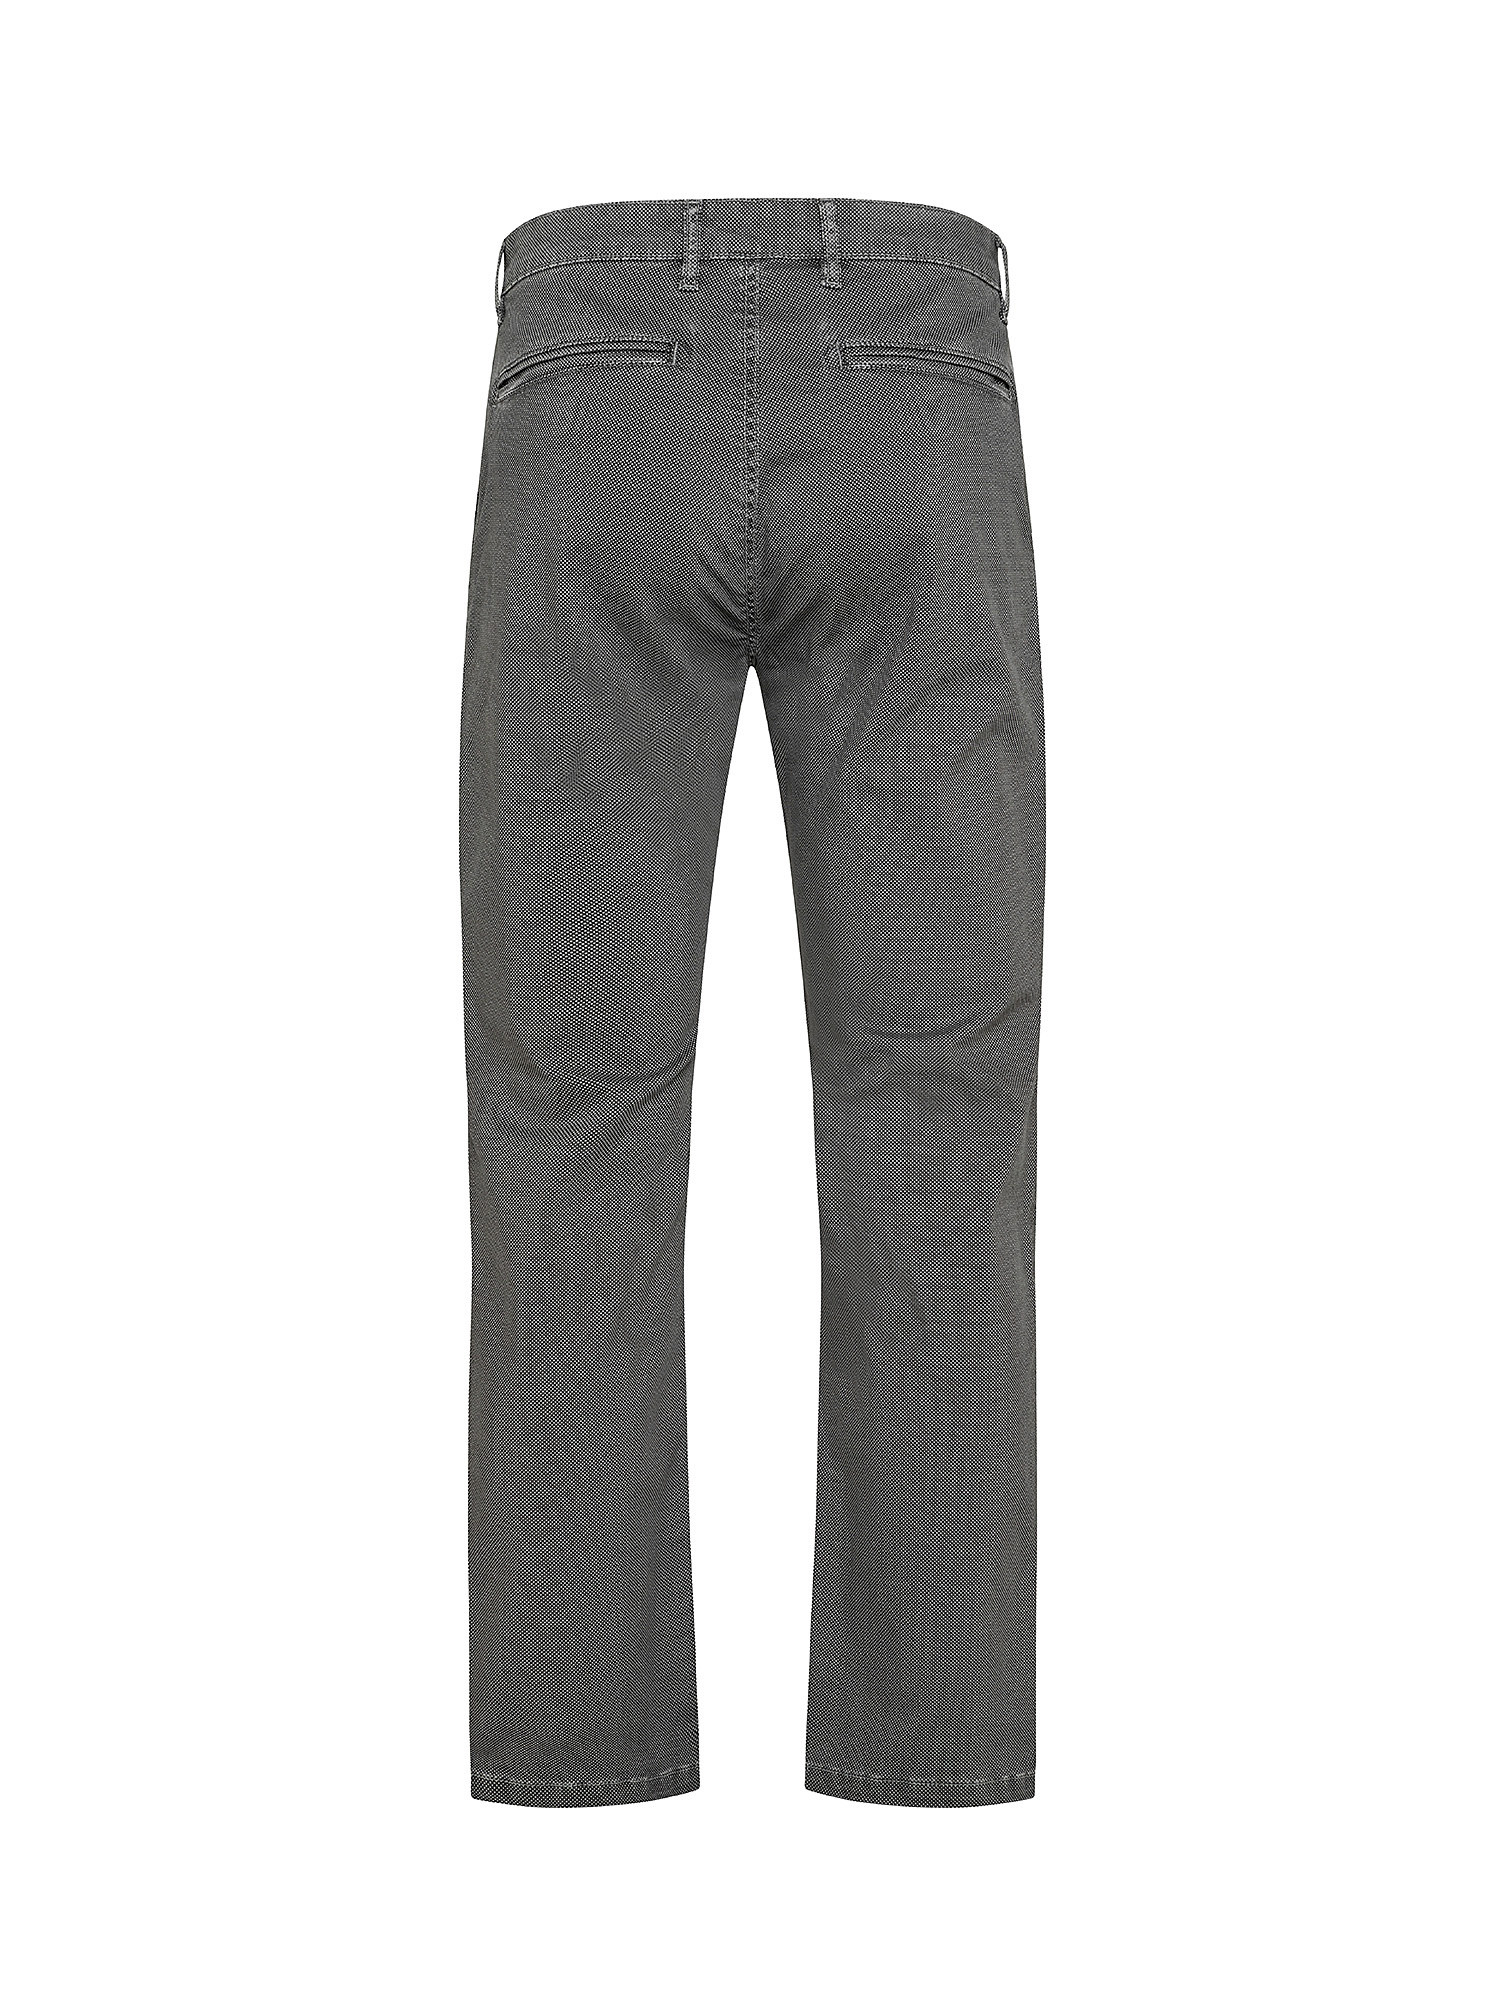 Stretch cotton chinos trousers, Grey, large image number 1